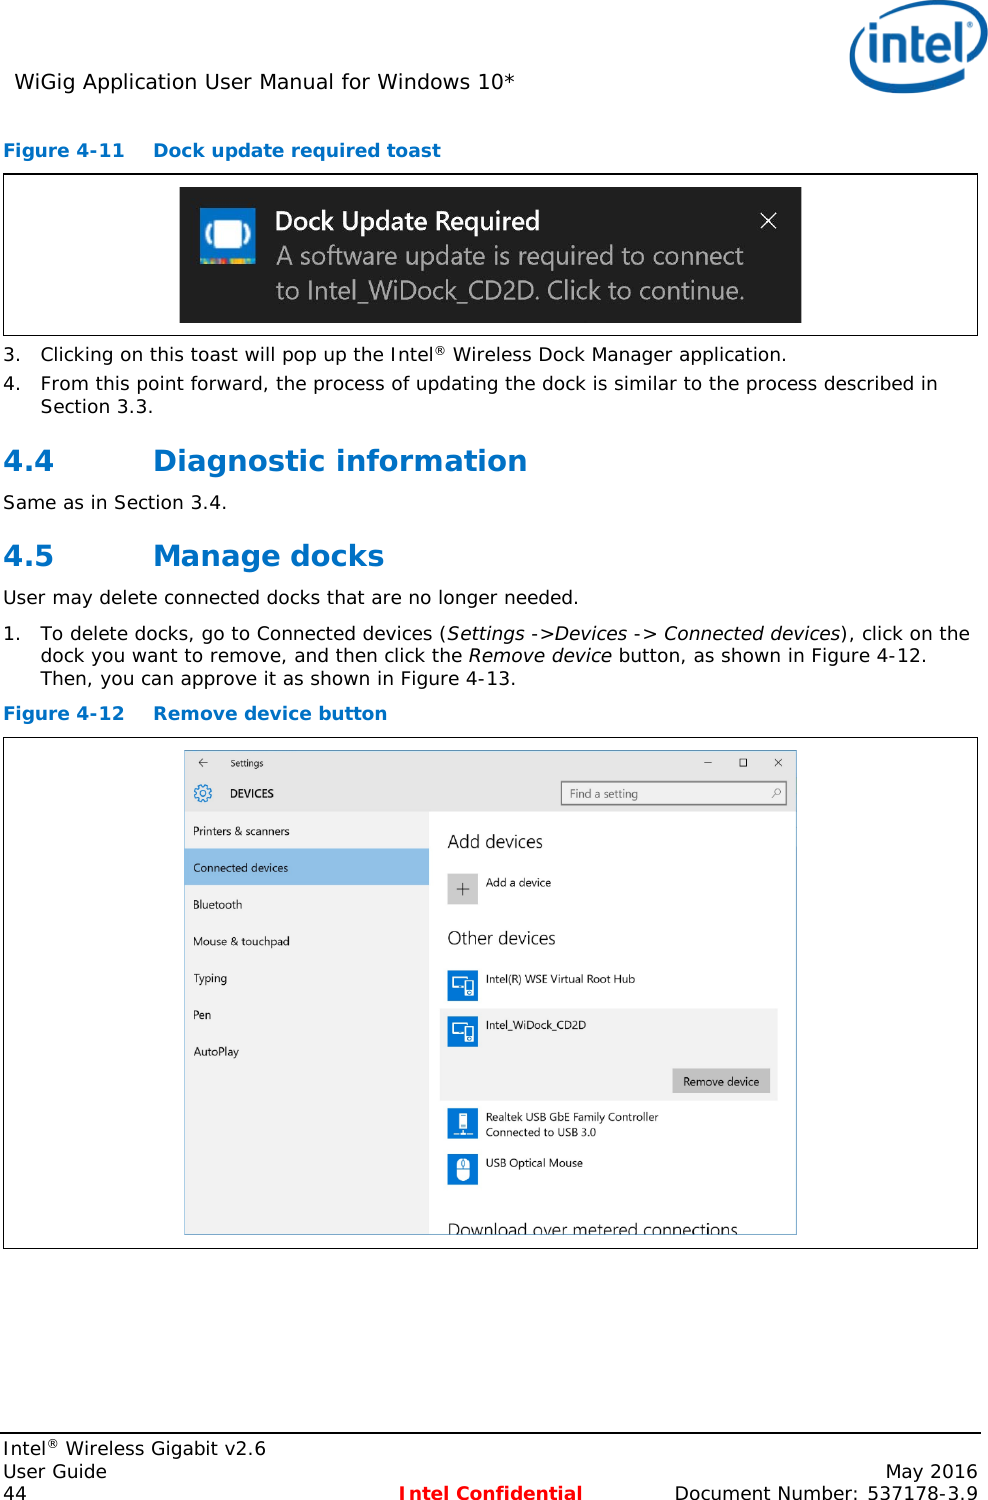 WiGig Application User Manual for Windows 10*    Intel® Wireless Gigabit v2.6 User Guide    May 2016 44 Intel Confidential Document Number: 537178-3.9 Figure 4-11 Dock update required toast  3. Clicking on this toast will pop up the Intel® Wireless Dock Manager application. 4. From this point forward, the process of updating the dock is similar to the process described in Section 3.3. 4.4 Diagnostic information Same as in Section 3.4. 4.5 Manage docks User may delete connected docks that are no longer needed. 1. To delete docks, go to Connected devices (Settings -&gt;Devices -&gt; Connected devices), click on the dock you want to remove, and then click the Remove device button, as shown in Figure 4-12. Then, you can approve it as shown in Figure 4-13. Figure 4-12 Remove device button  